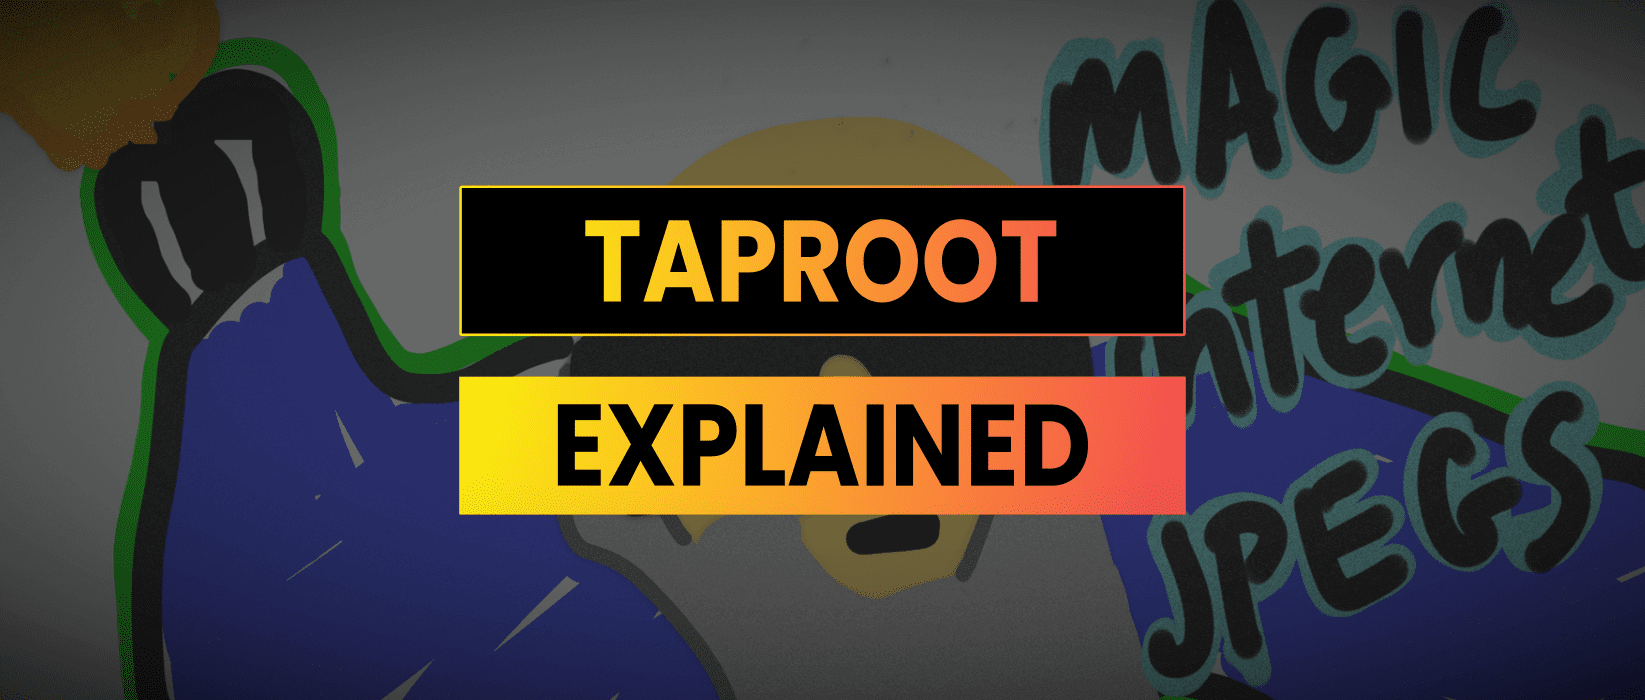 Taproot Explained | Beneficial For Bitcoin?